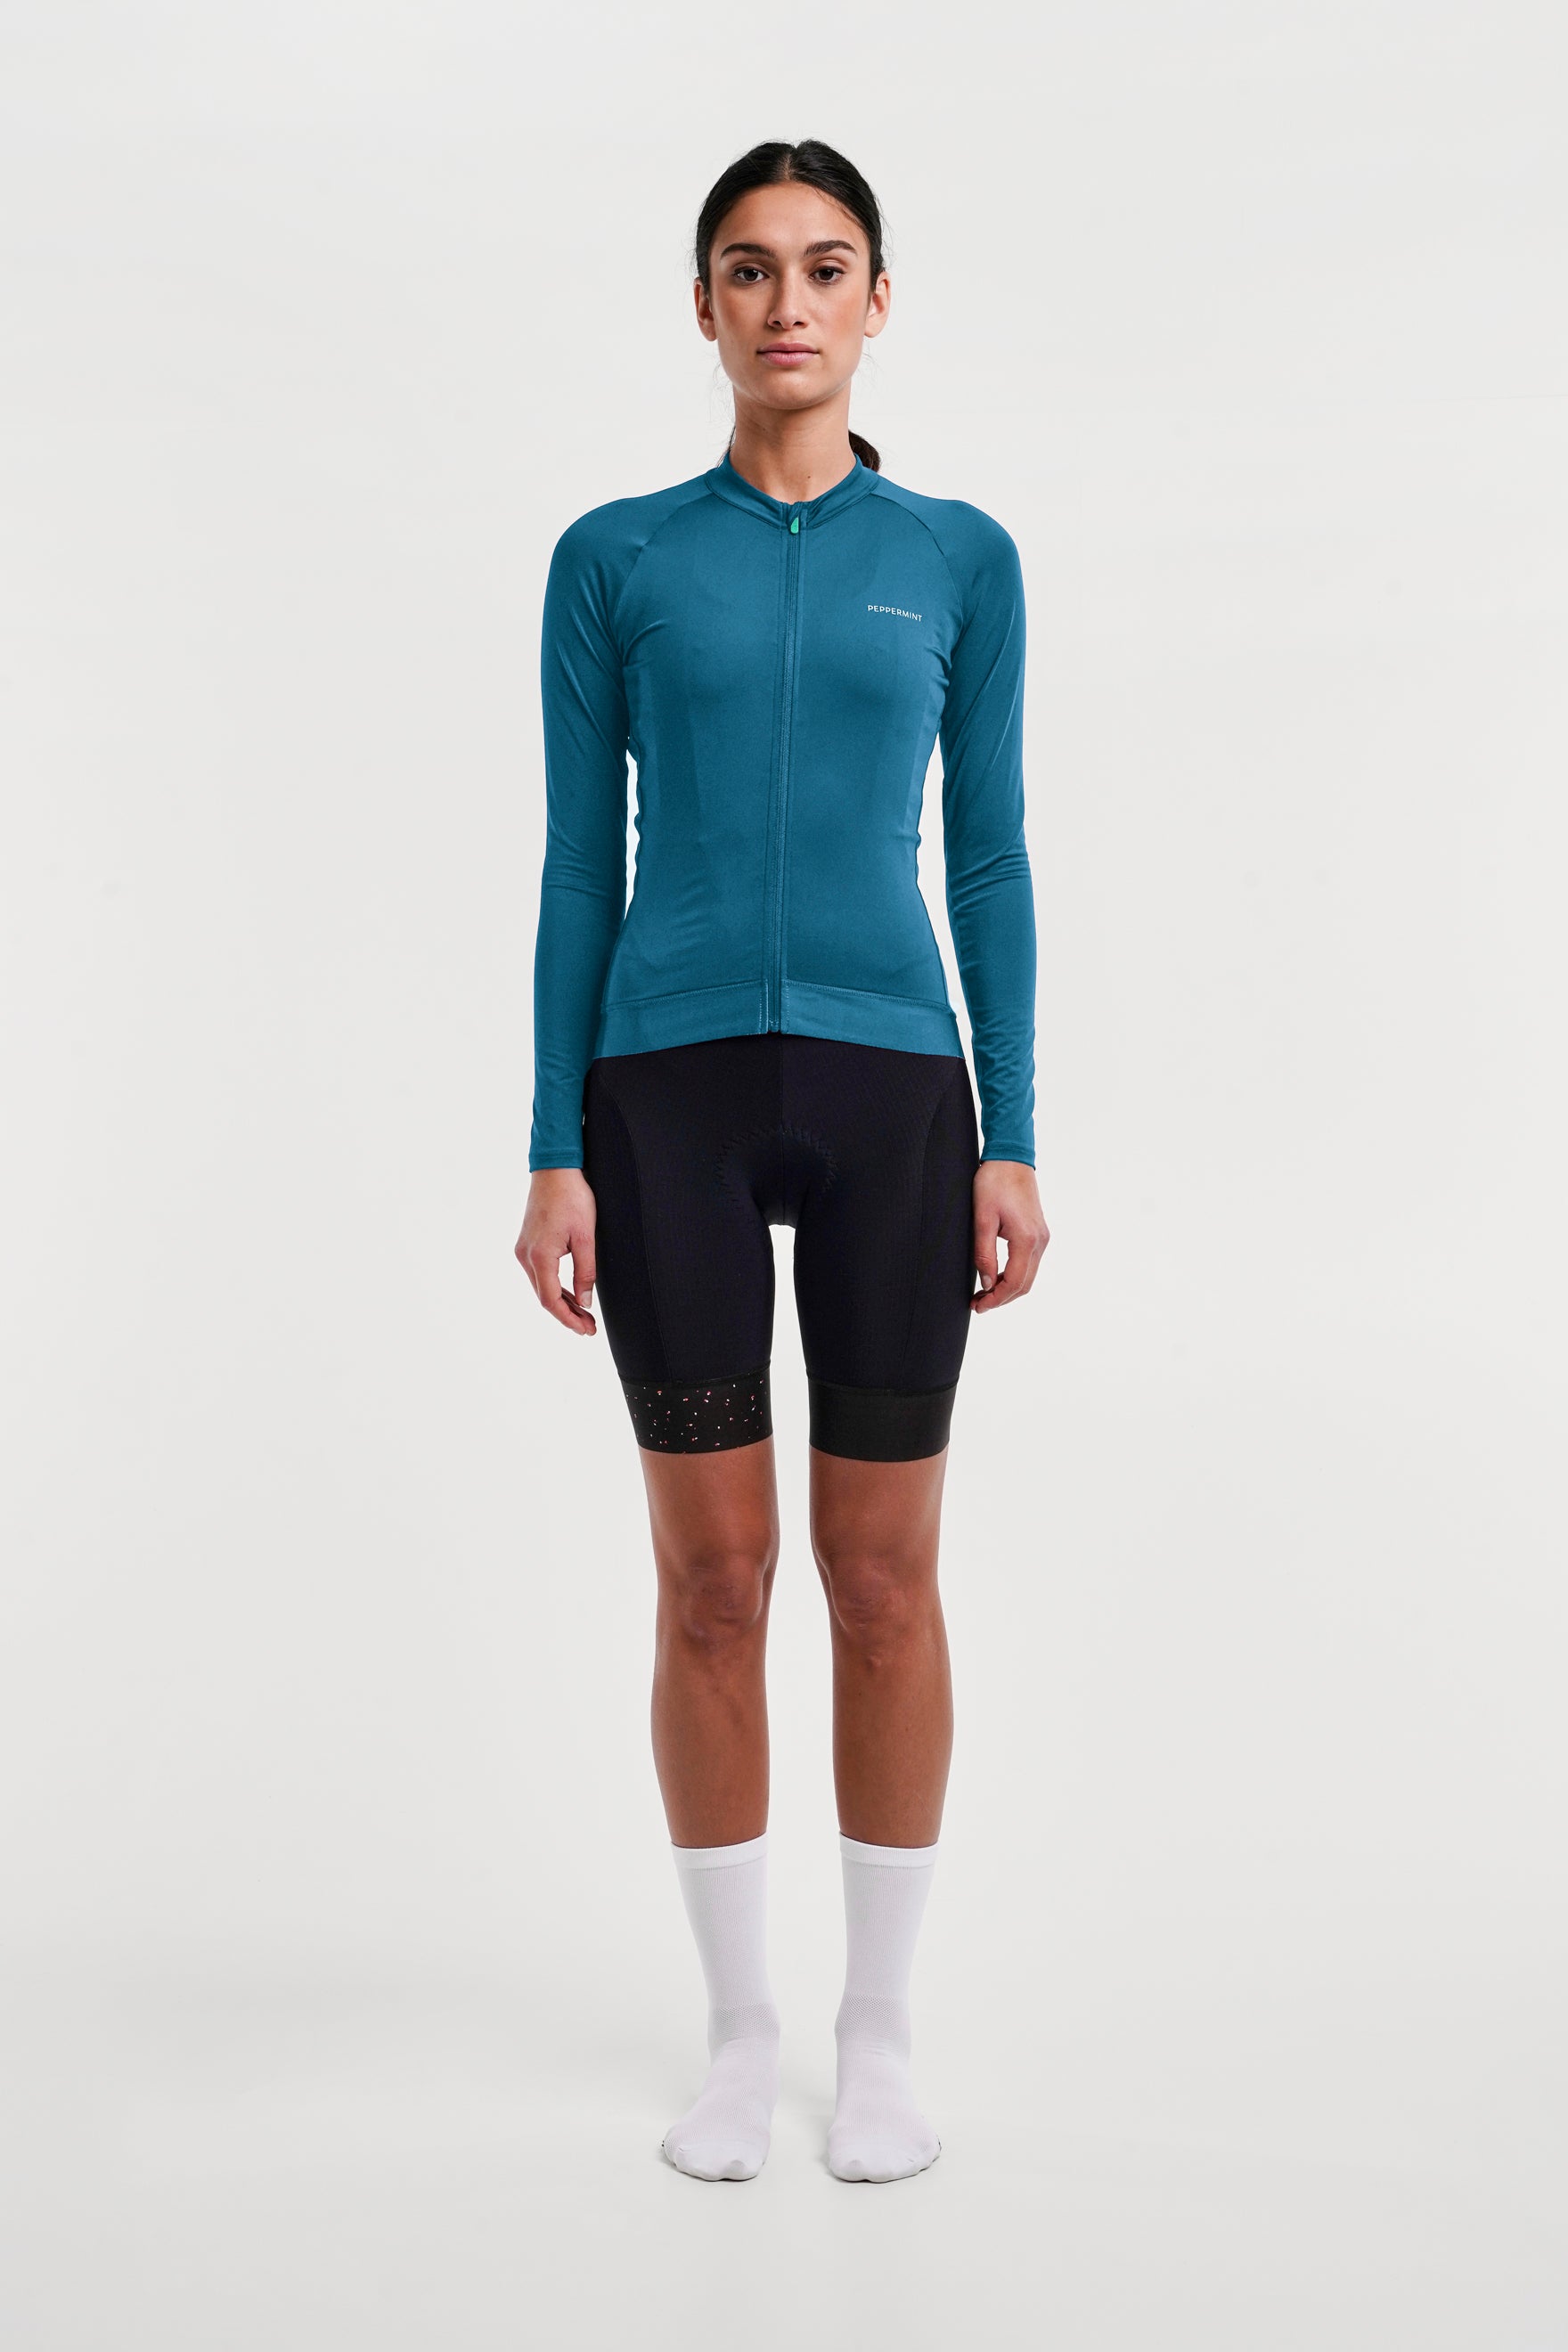 P.Cycled Signature Long-Sleeve Jersey